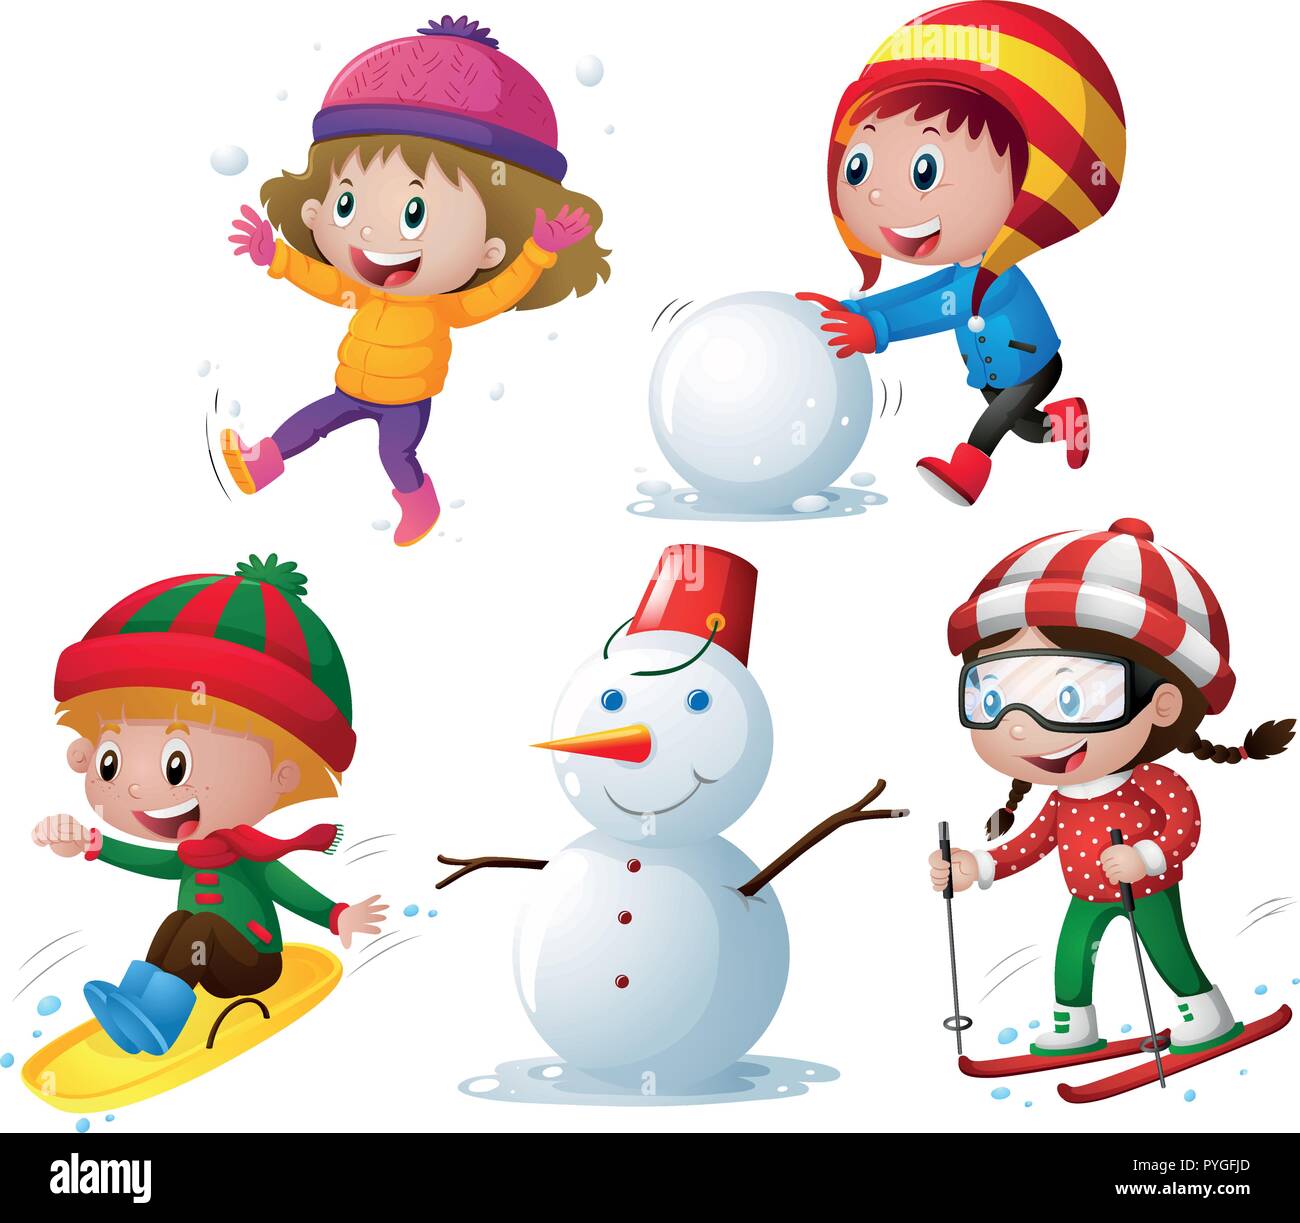 Children in winter clothes playing snow illustration Stock Vector